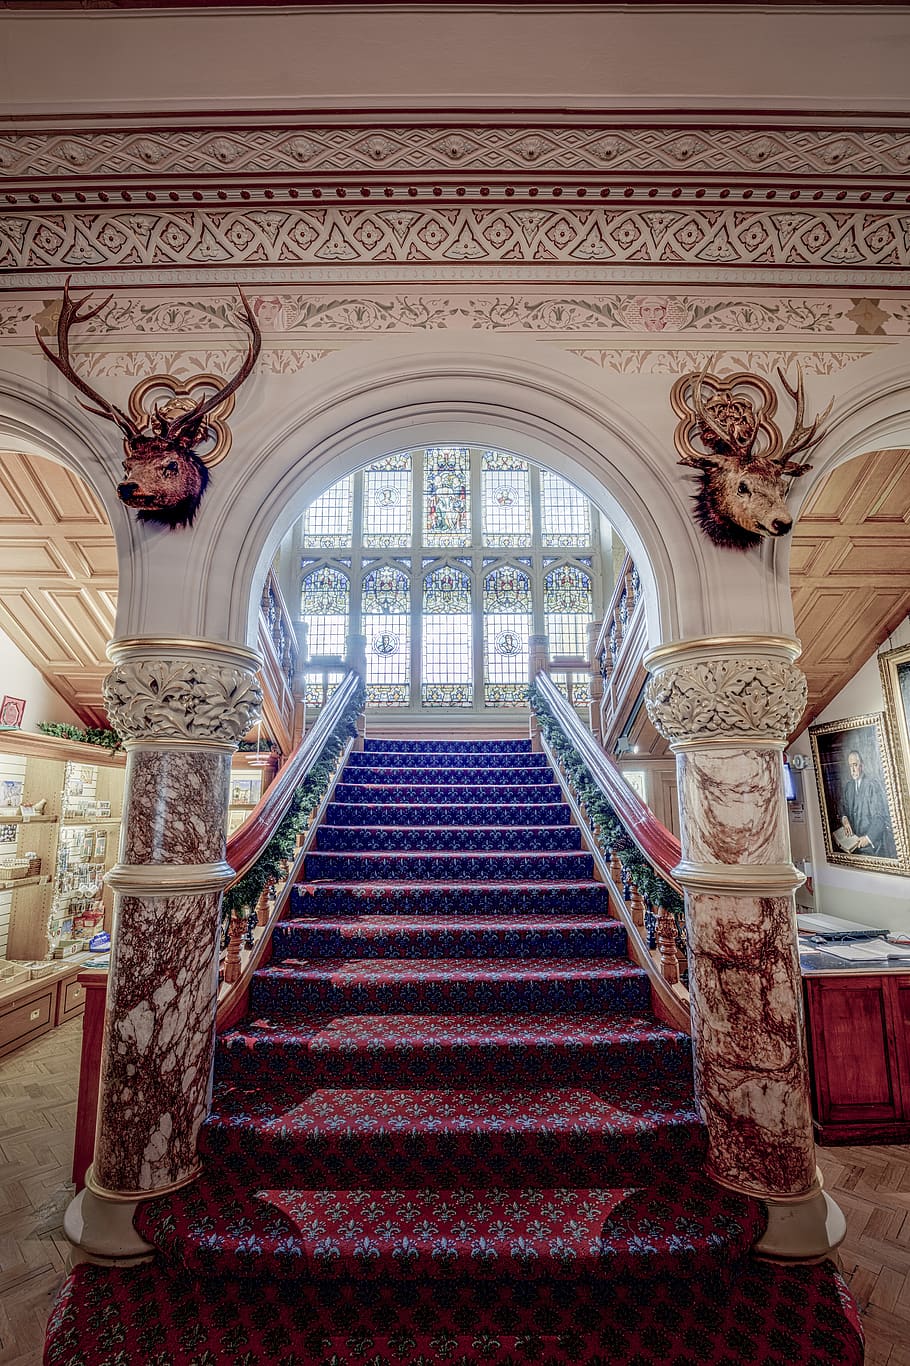 cliffe castle, historic, historical, old, famous, step, steps, stair, stairs, staircase